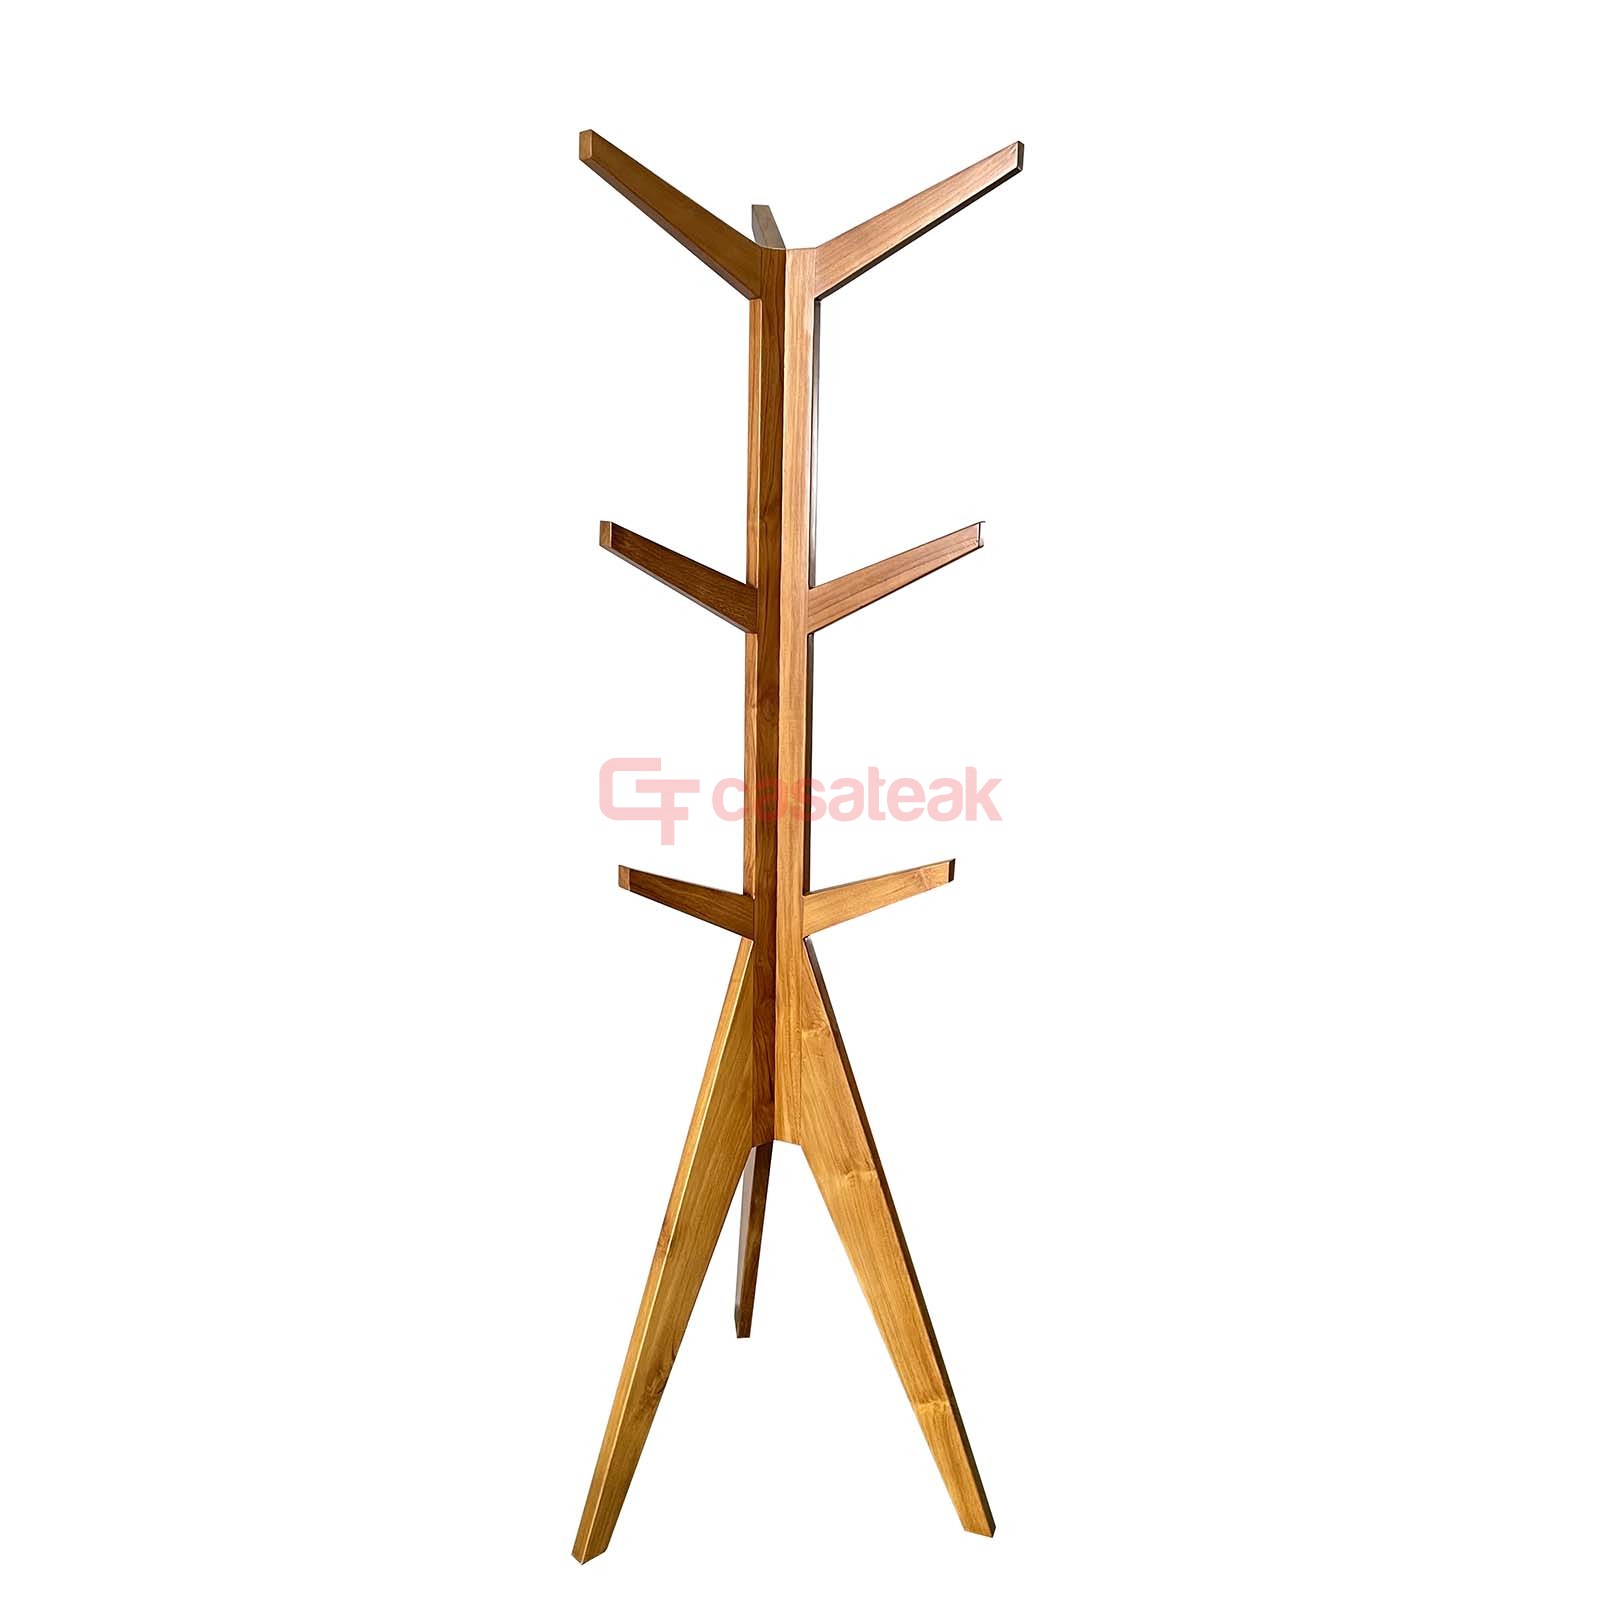 Solid wood tree shaped coat stand.